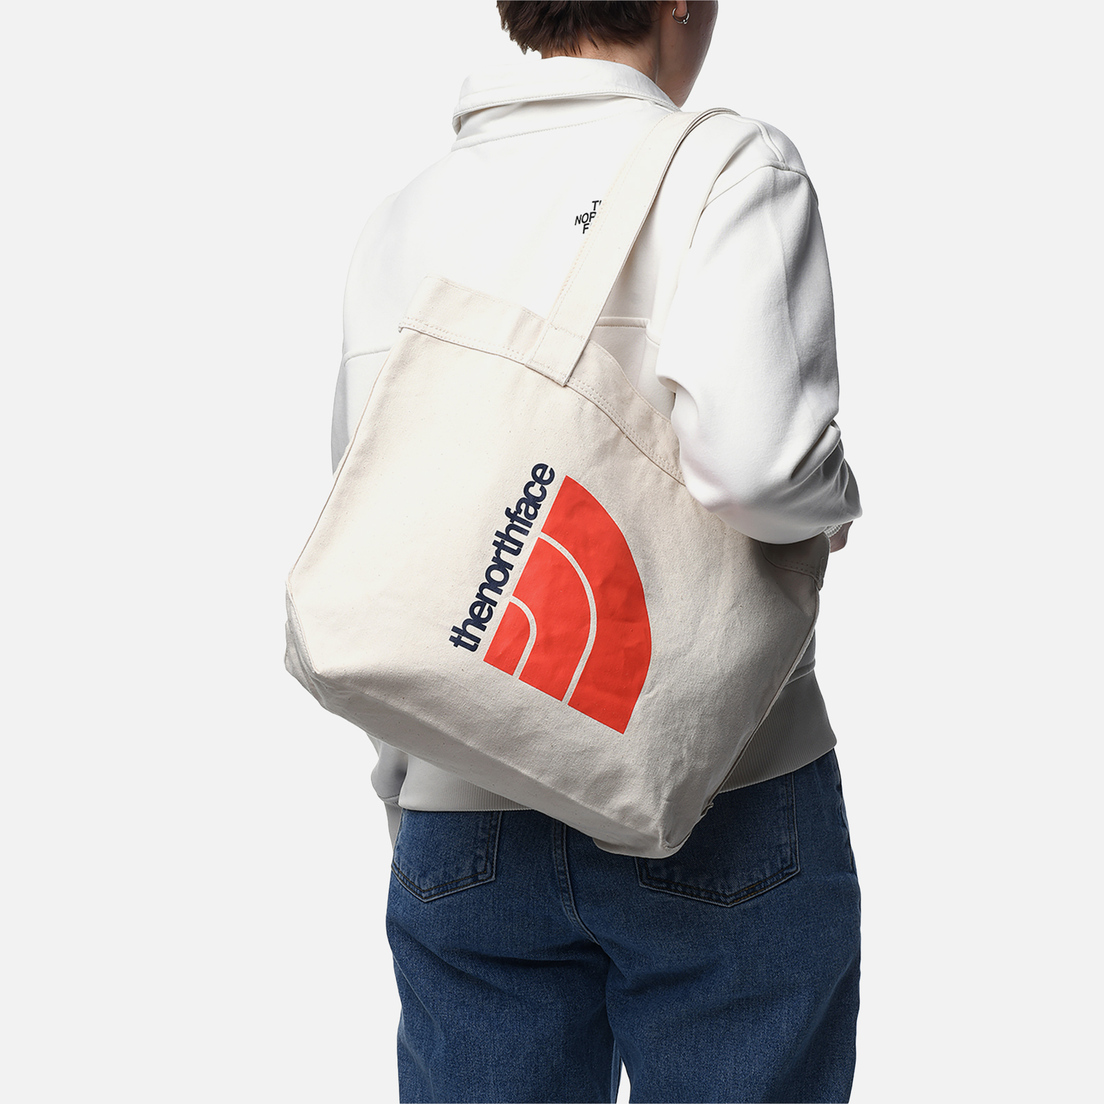 The North Face Сумка Cotton Tote